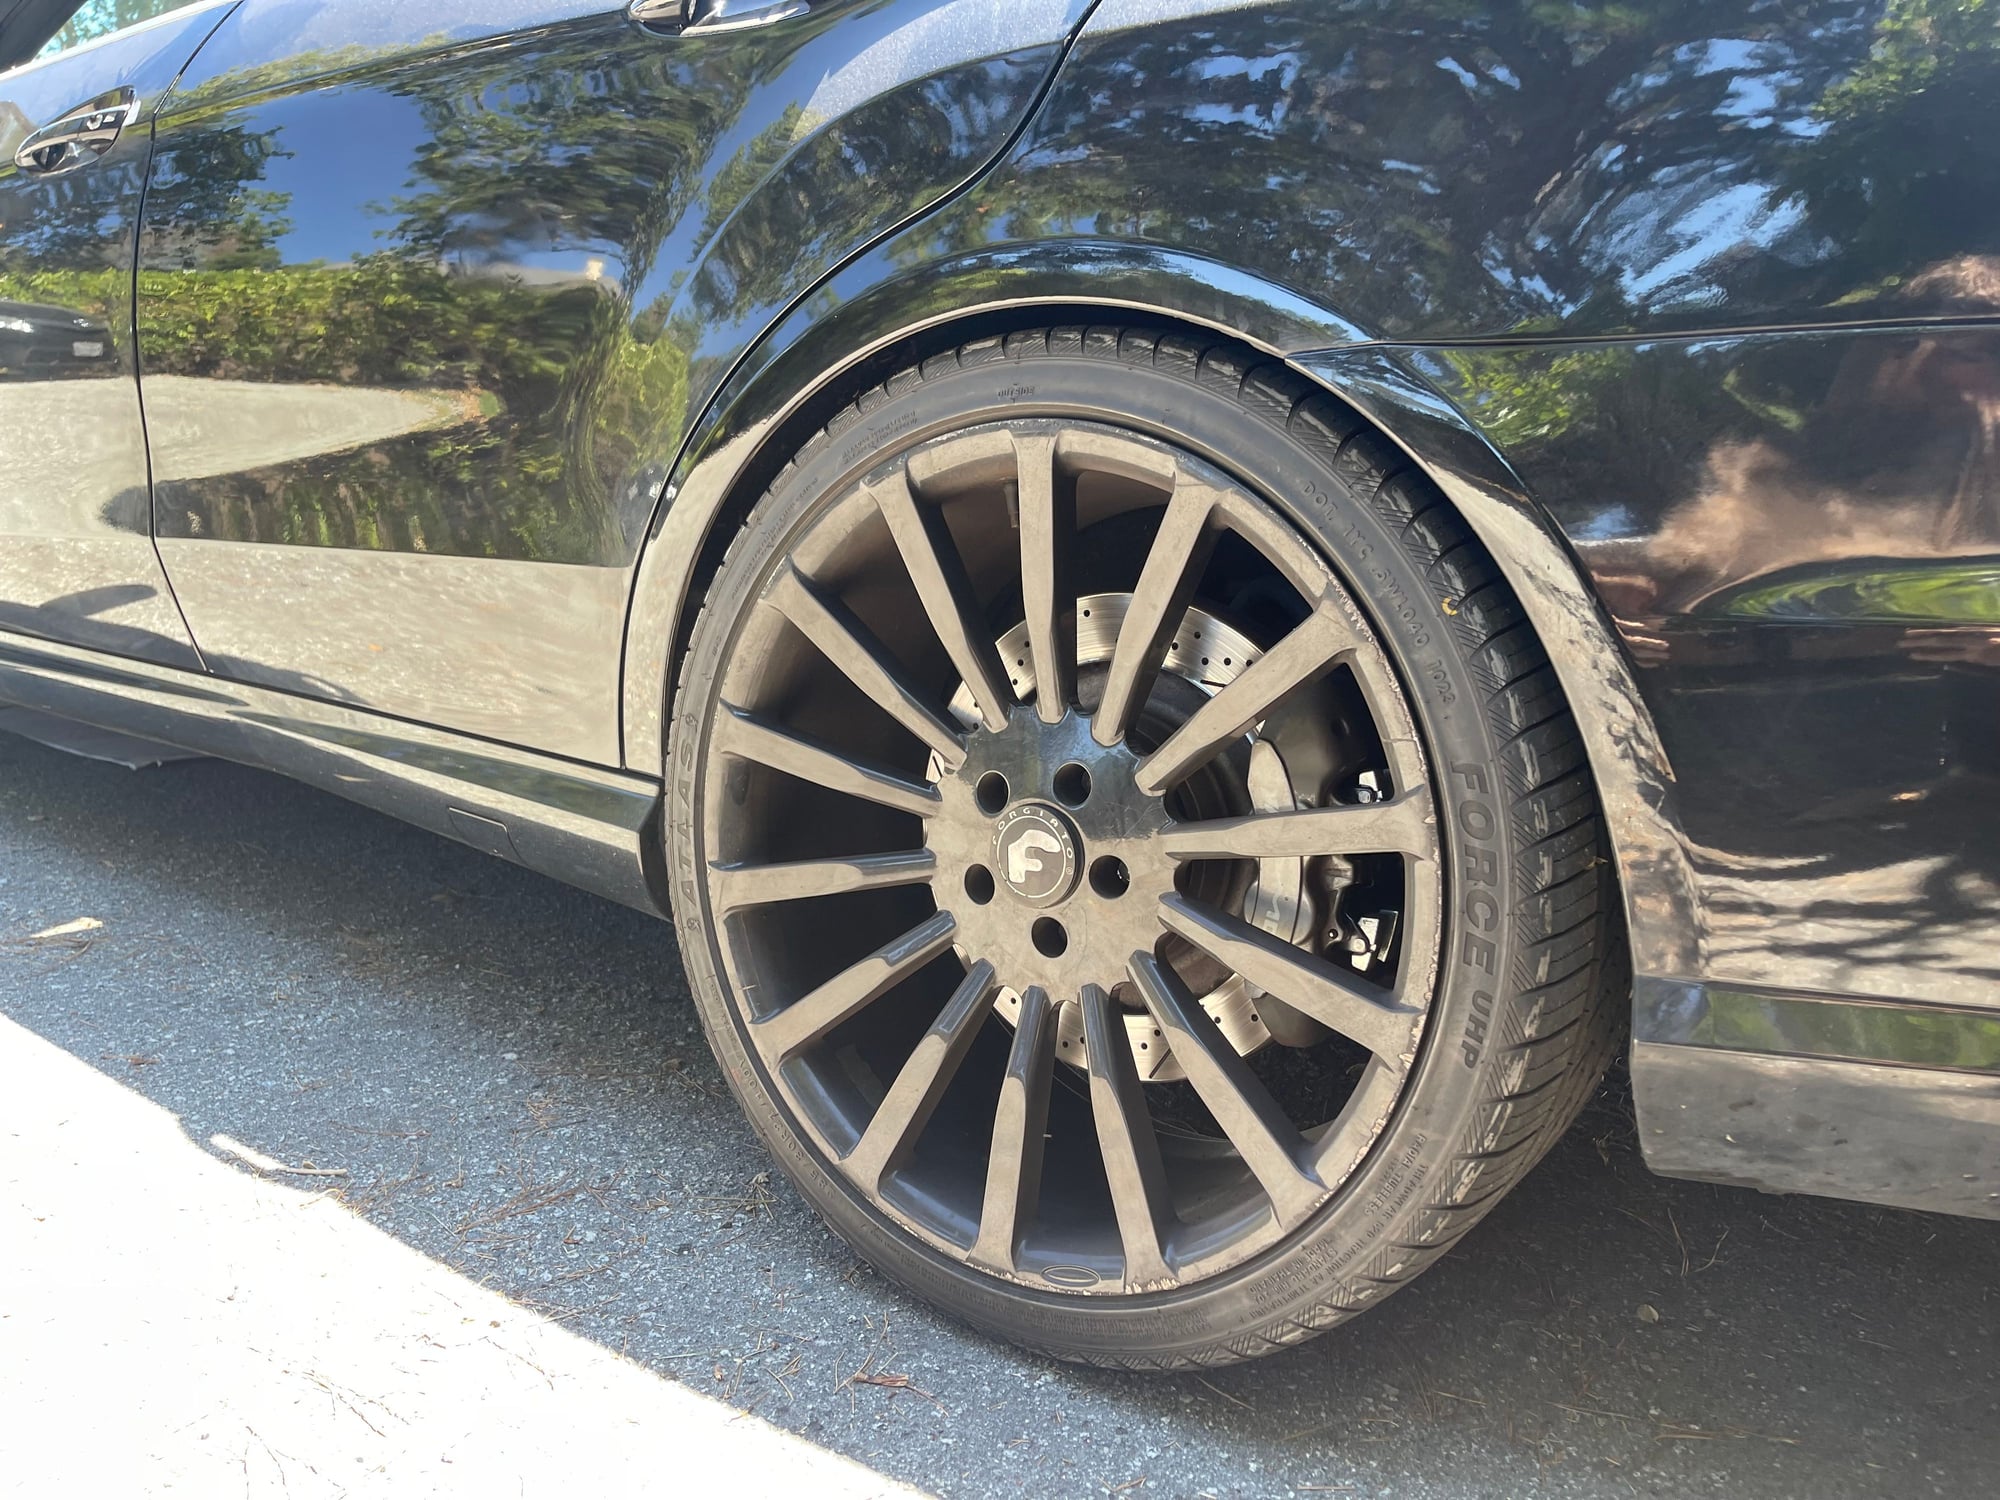 Wheels and Tires/Axles - Forgiato Wheel and Tires; 21 Inch, 5x112 Pattern Mercedes - Used - 1993 to 2023 Mercedes-Benz E-Class - 1993 to 2023 Mercedes-Benz C-Class - 2004 to 2014 Mercedes-Benz CLS-Class - Carmel Valley, CA 93924, United States